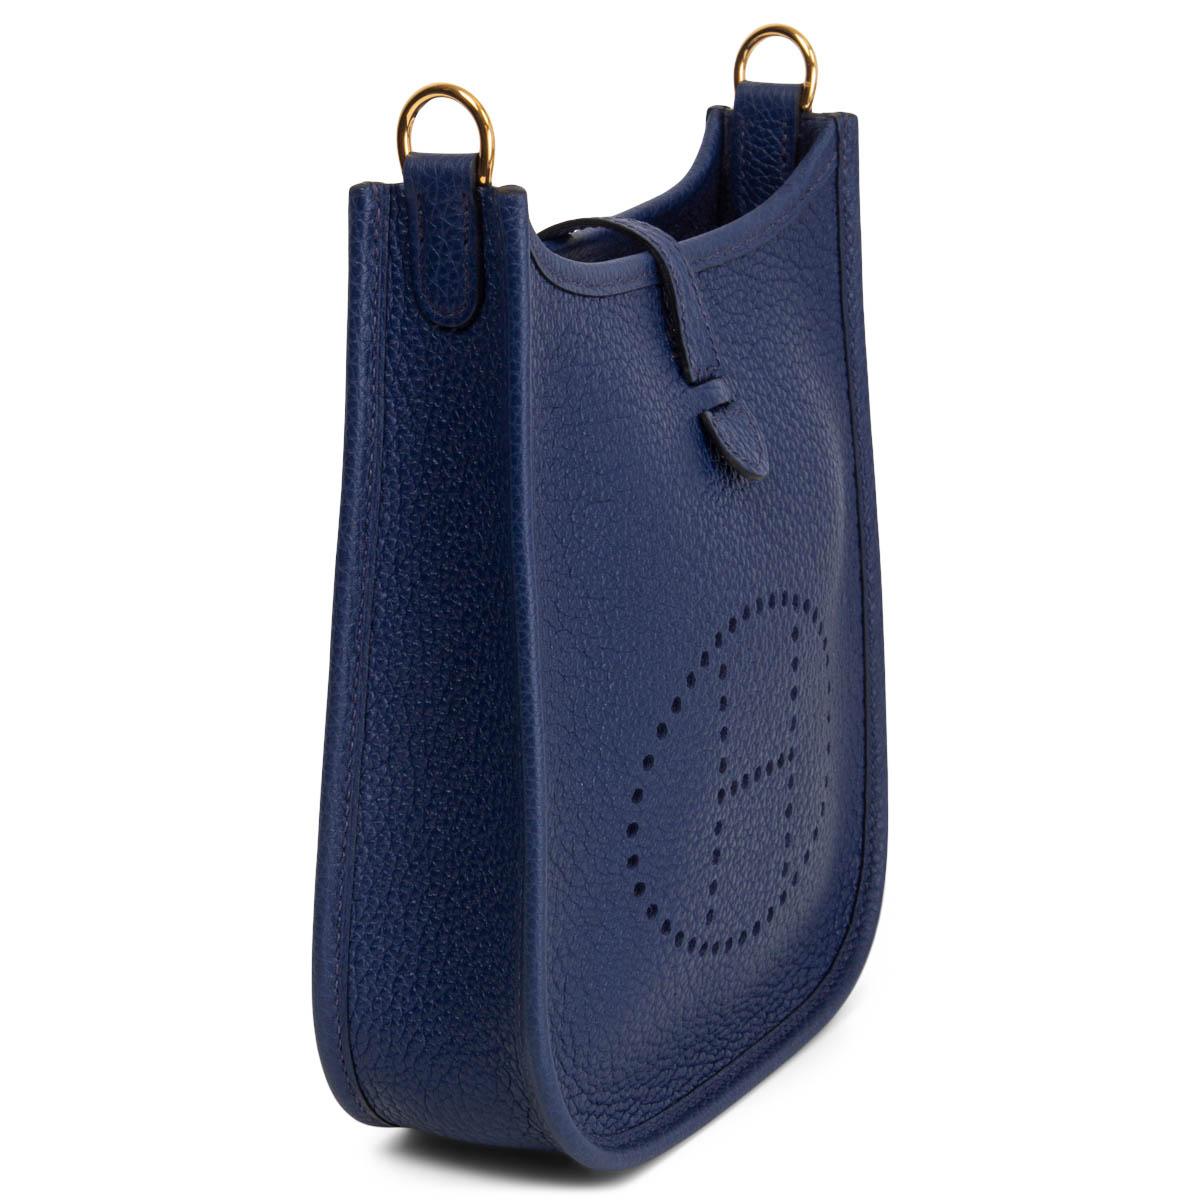 100% authentic Hermès Evelyne 16 Amazone crossbody bag in Bleu Saphir (sapphire blue) Taurillon Maurice leather with wool sangle Flipper Ball shoulder strap in blue, black and tan canvas. Perforated leather 